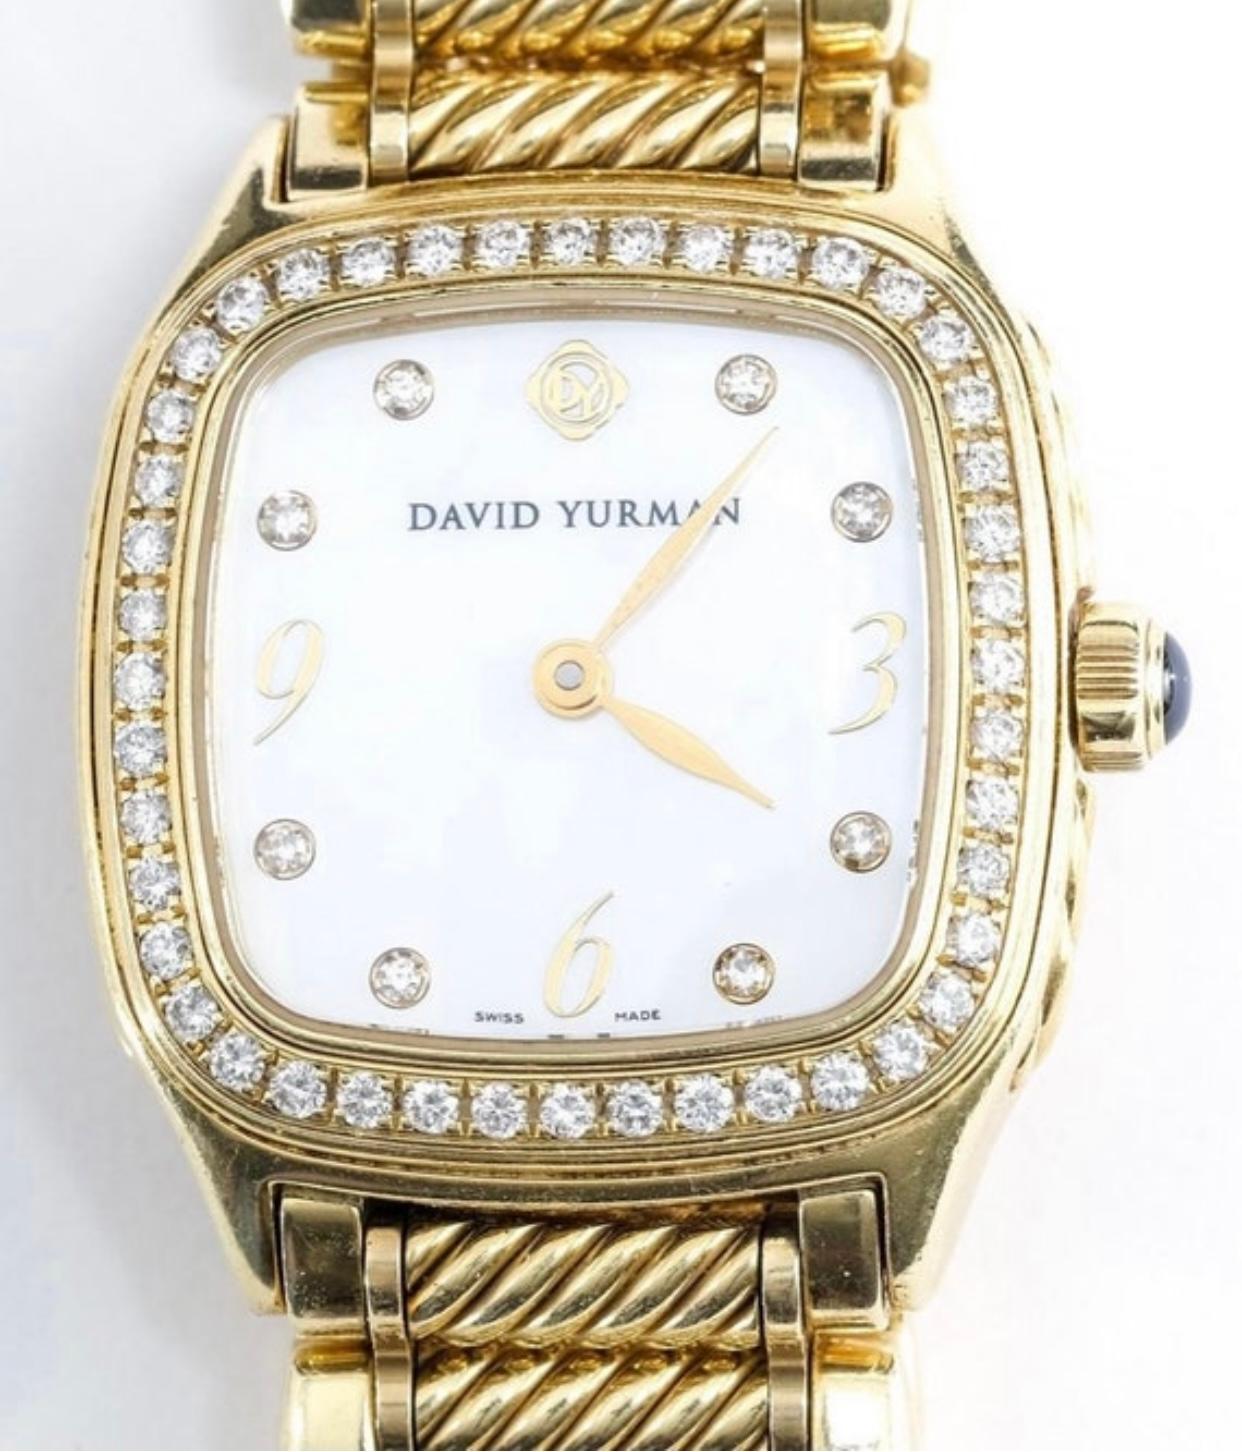 Authentic 18k Gold & Diamond David Yurman Women’s Thoroughbred Watch.

18k Yellow gold case and band, set with over 50 Round Brilliant Diamonds. 

Mother of Pearl Dial, Diamond Hour Markers, and DY Logo at the 12:00 Position. 

25mm Case width, fits